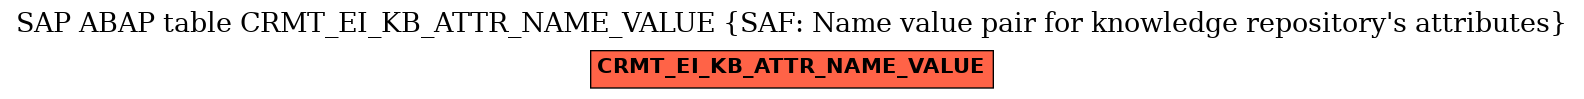 E-R Diagram for table CRMT_EI_KB_ATTR_NAME_VALUE (SAF: Name value pair for knowledge repository's attributes)